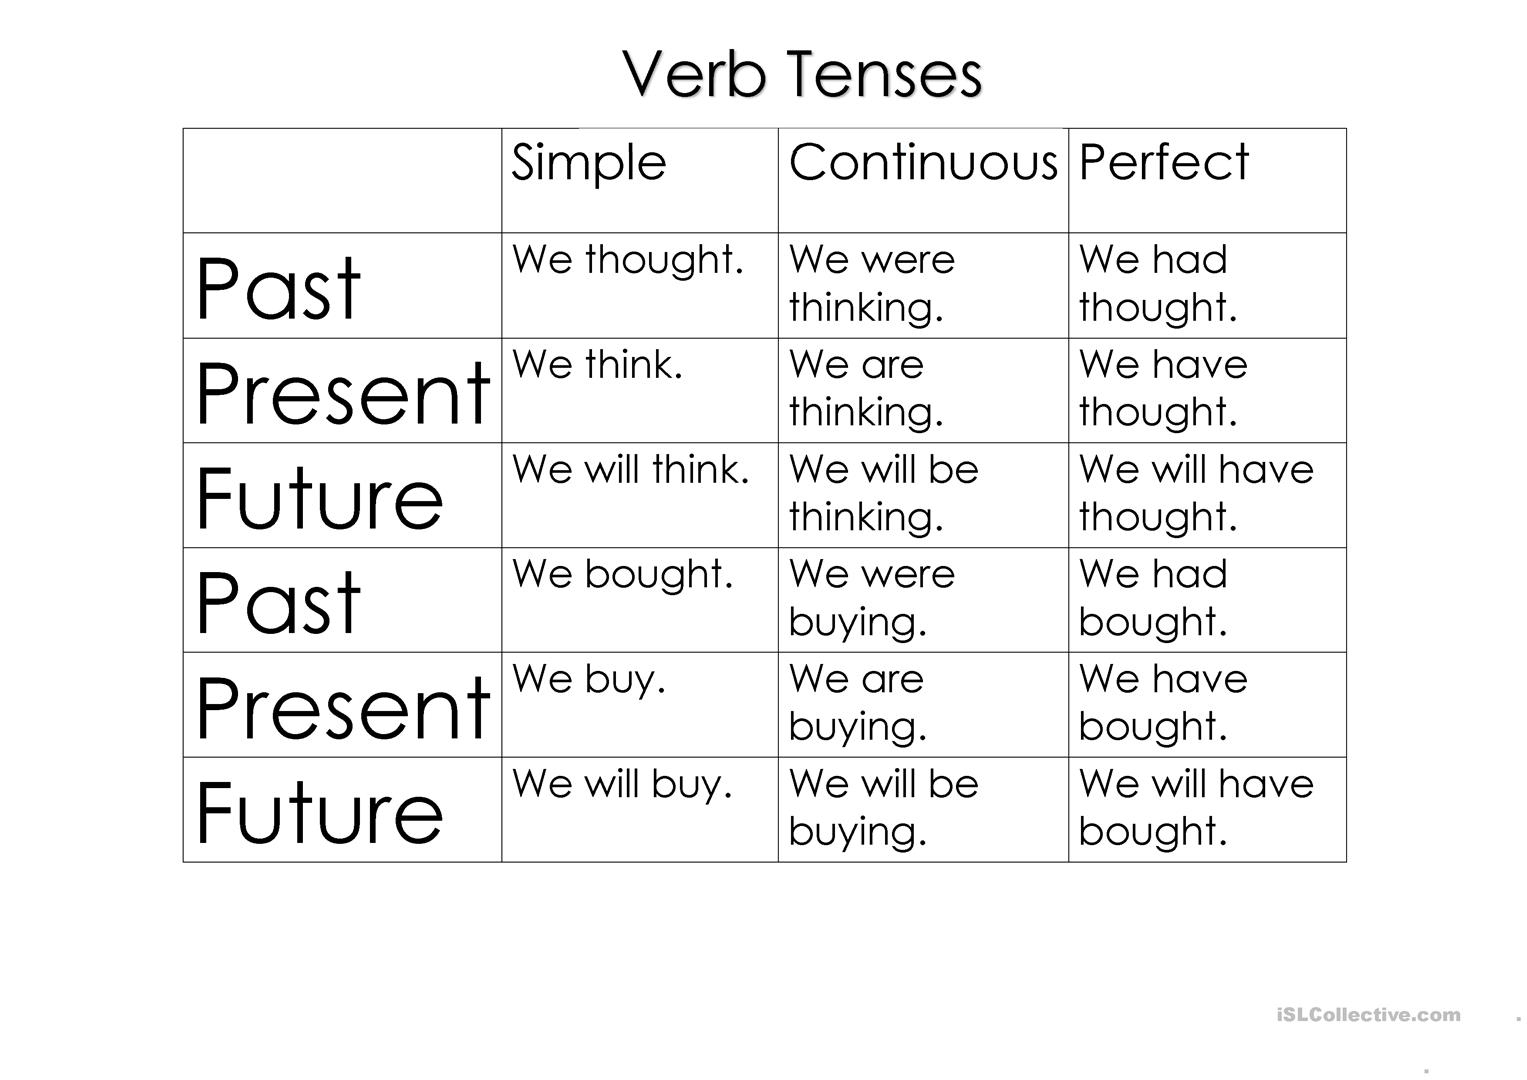 Verbs Tenses And Sentence Structure Worksheet - Free Esl Printable | Free Printable Worksheets On Verb Tenses